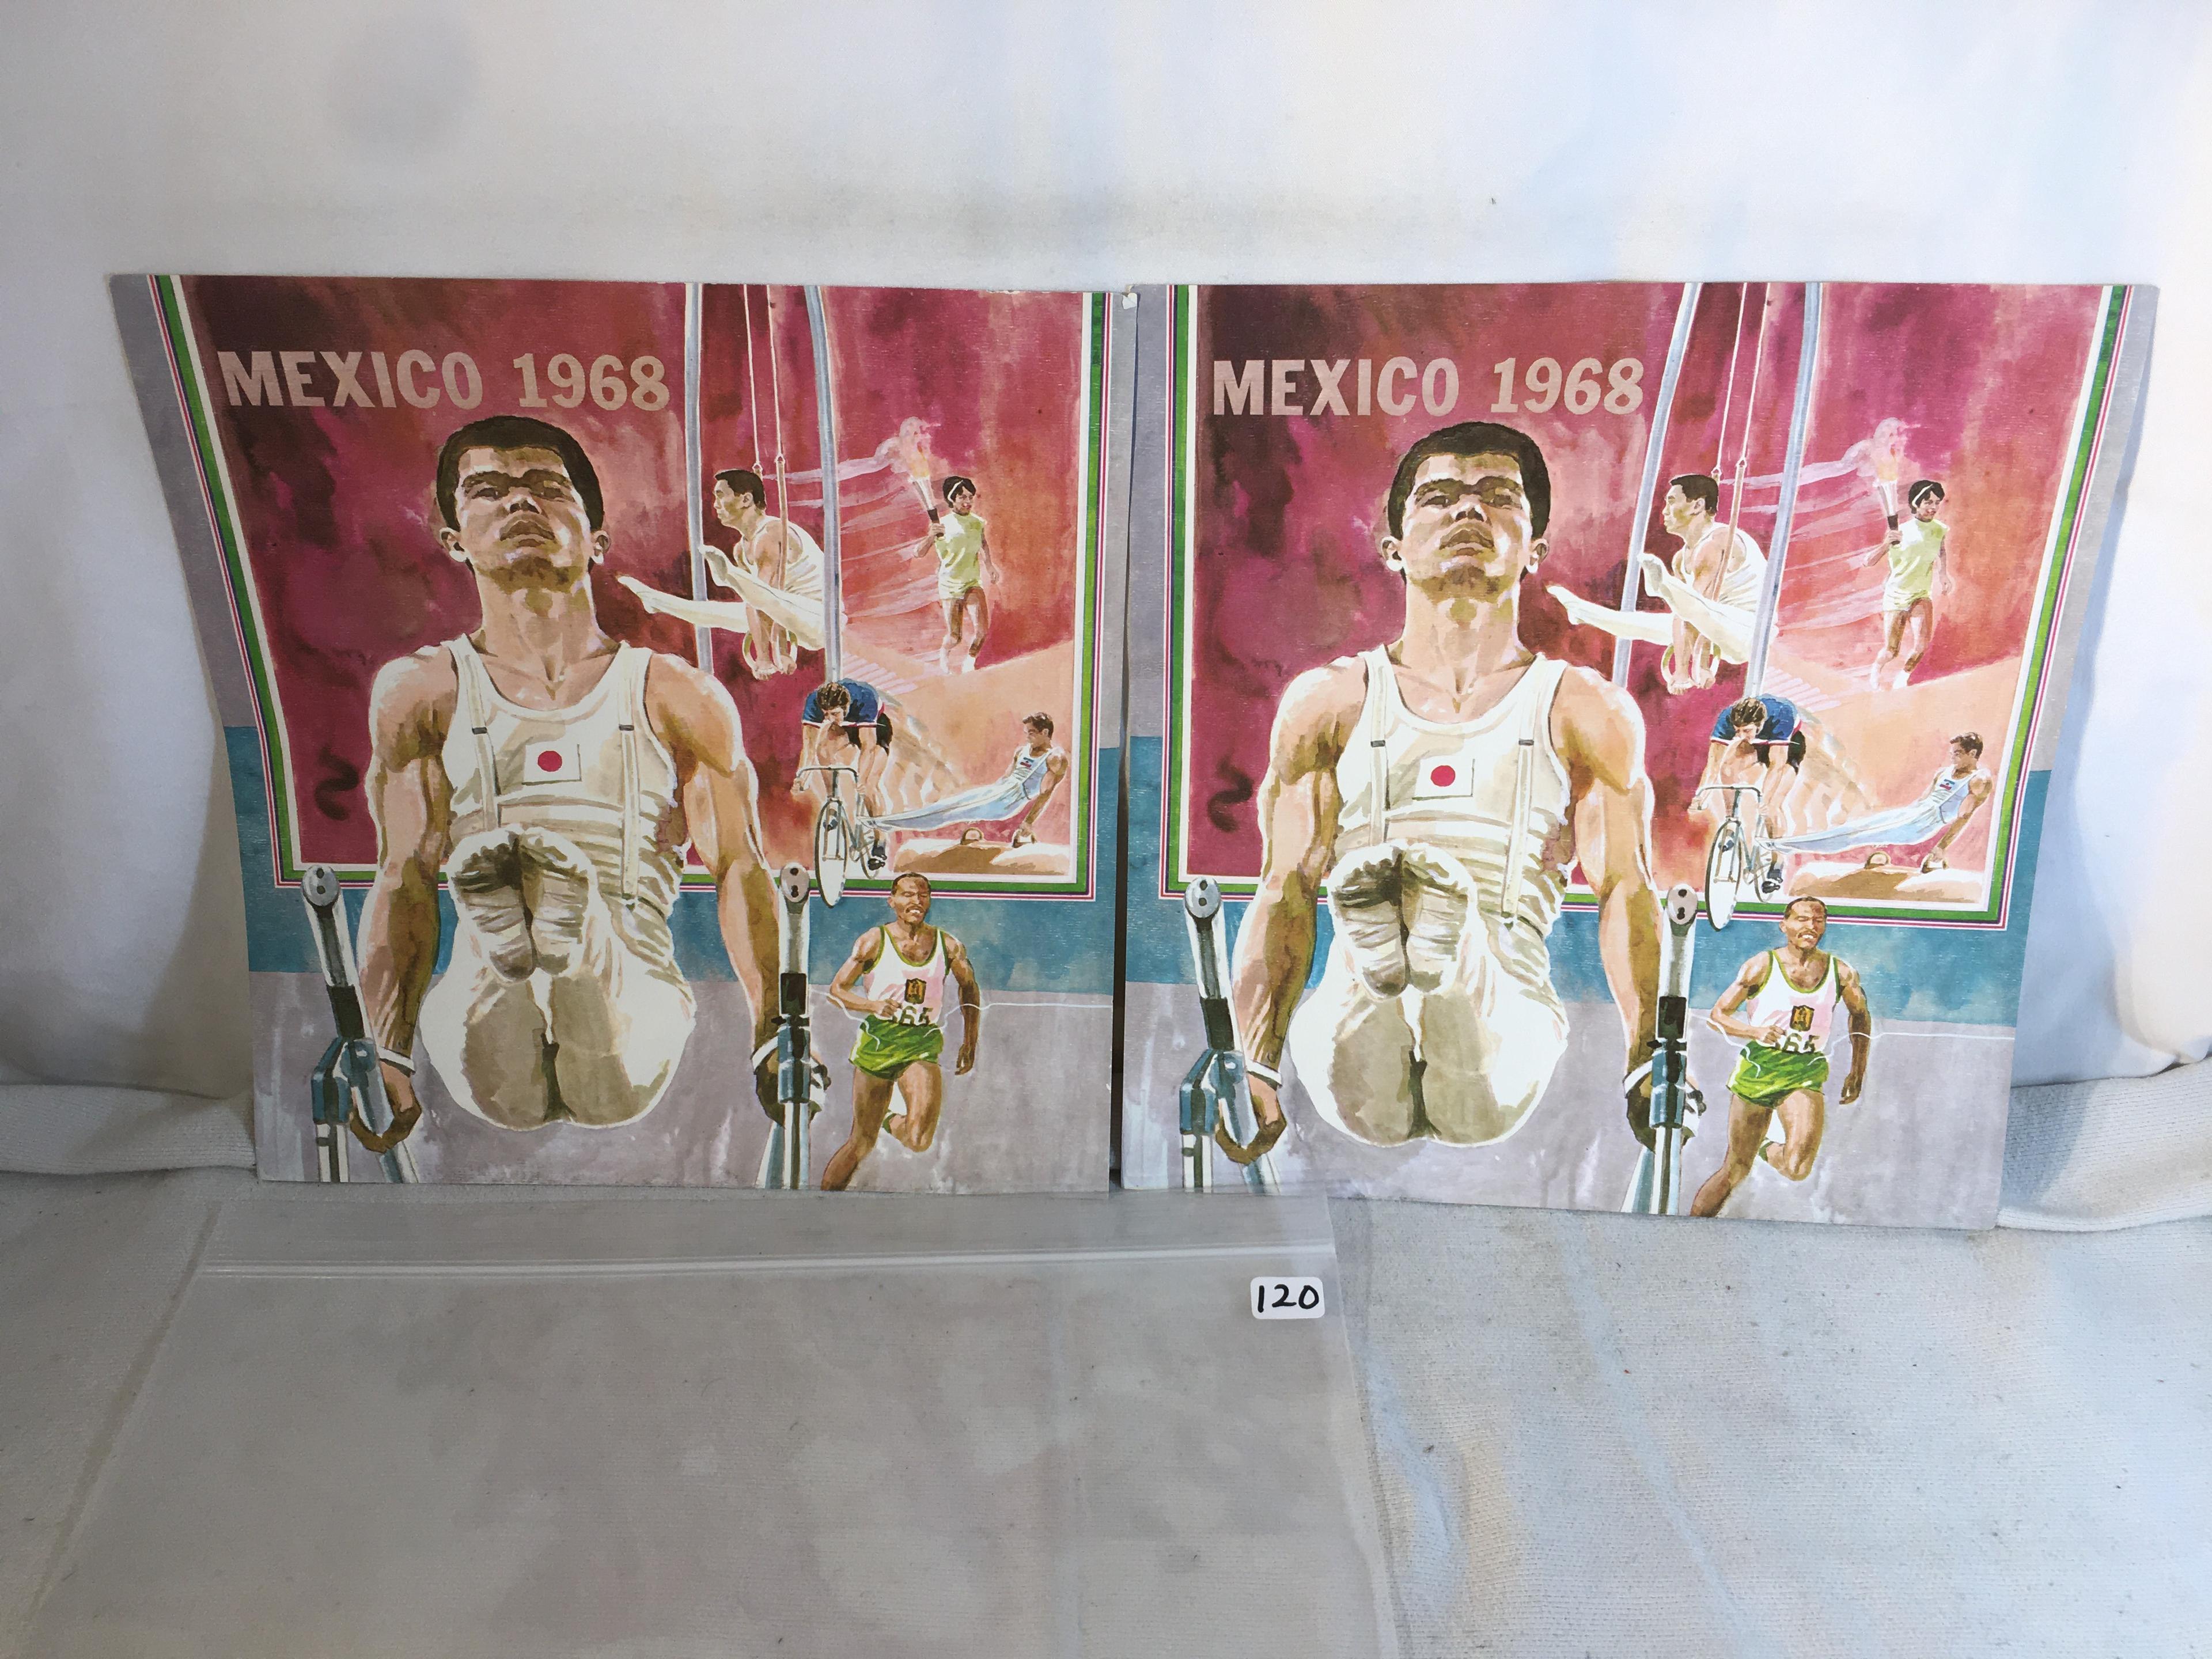 Lot of 2 Pcs Collector Assorted Mexico 1968 Picture Size: 10x9.5" - See Pictures